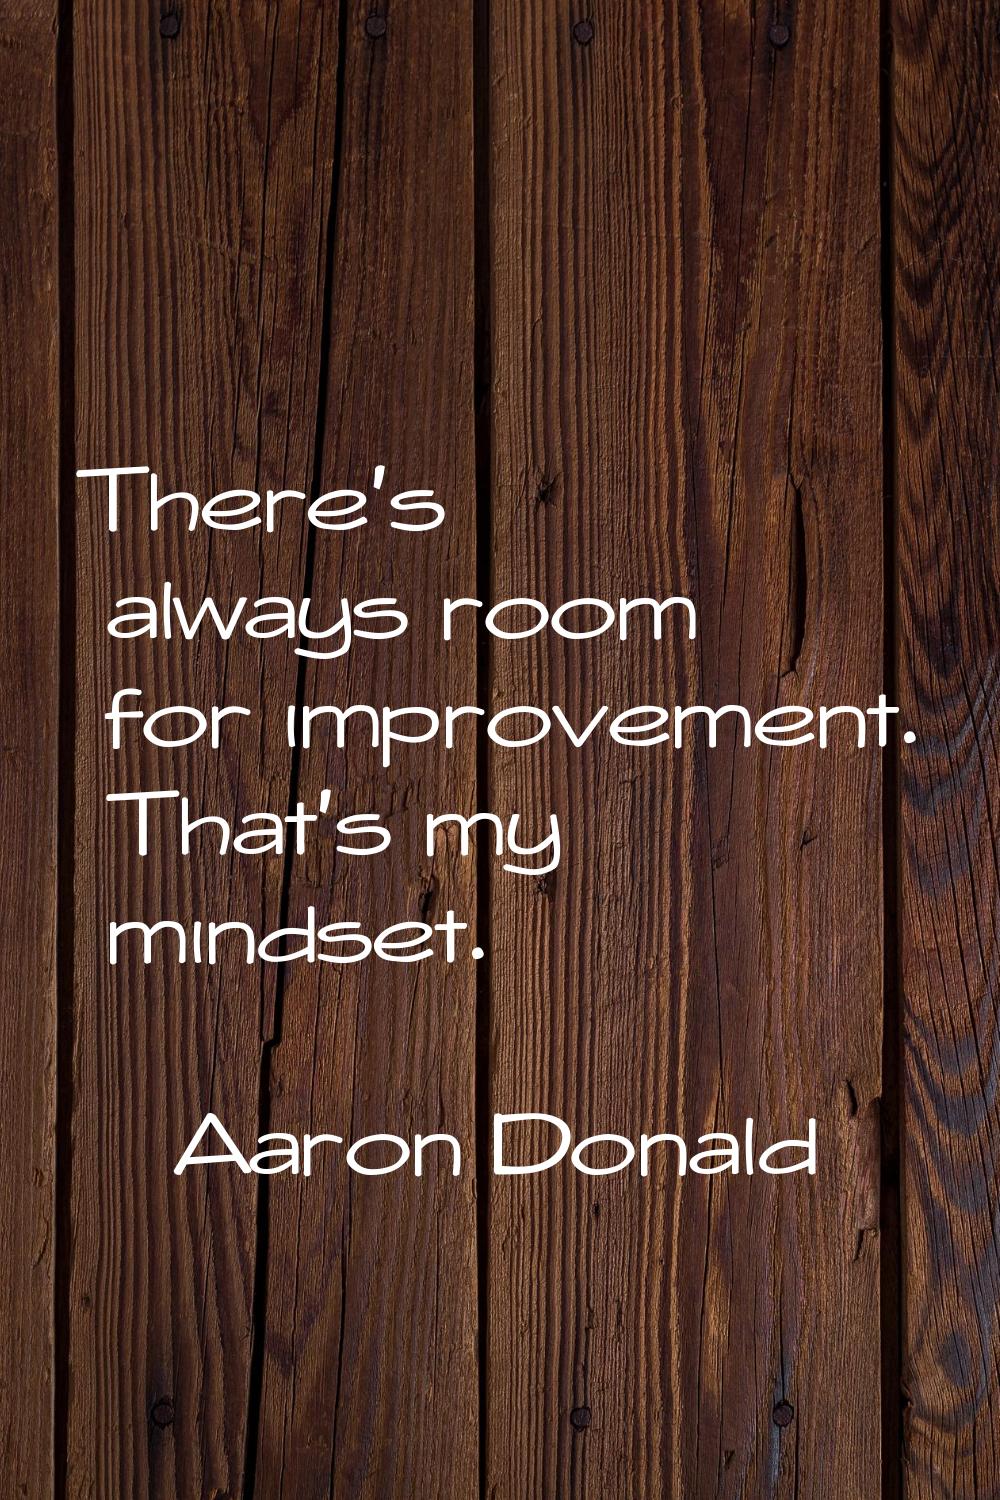 There's always room for improvement. That's my mindset.